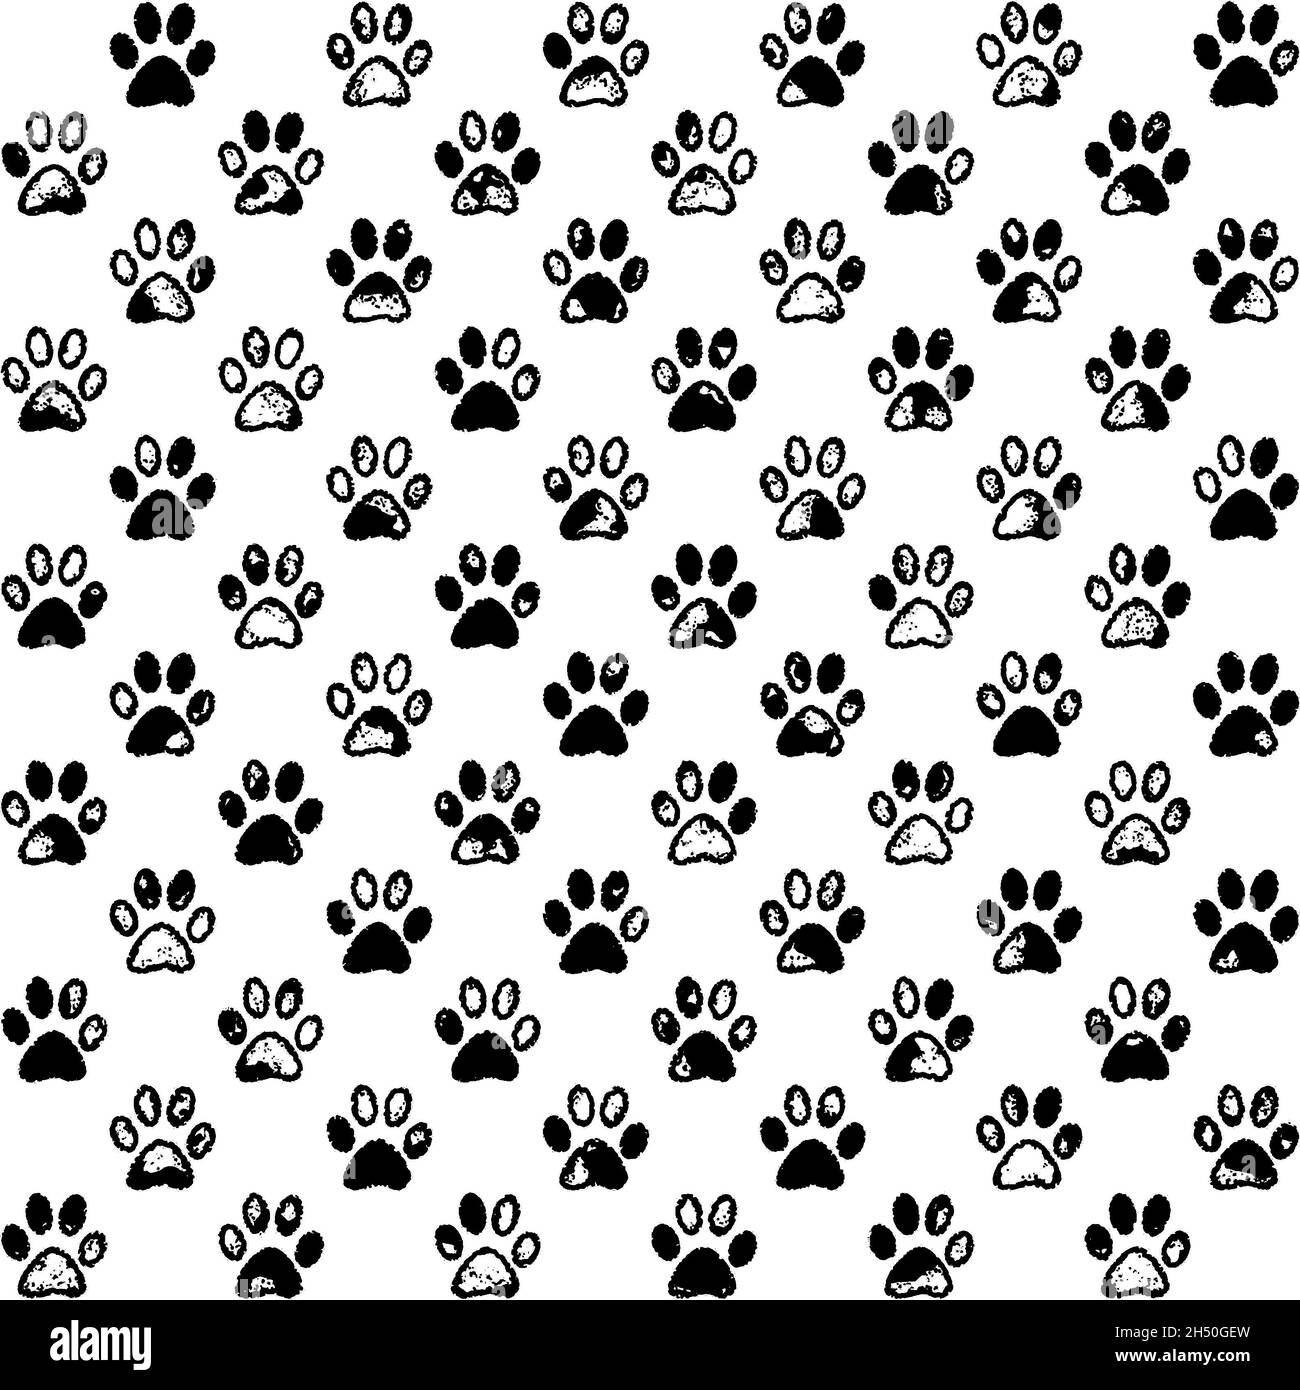 Paw prints in black and white, a seamless background pattern Stock Photo